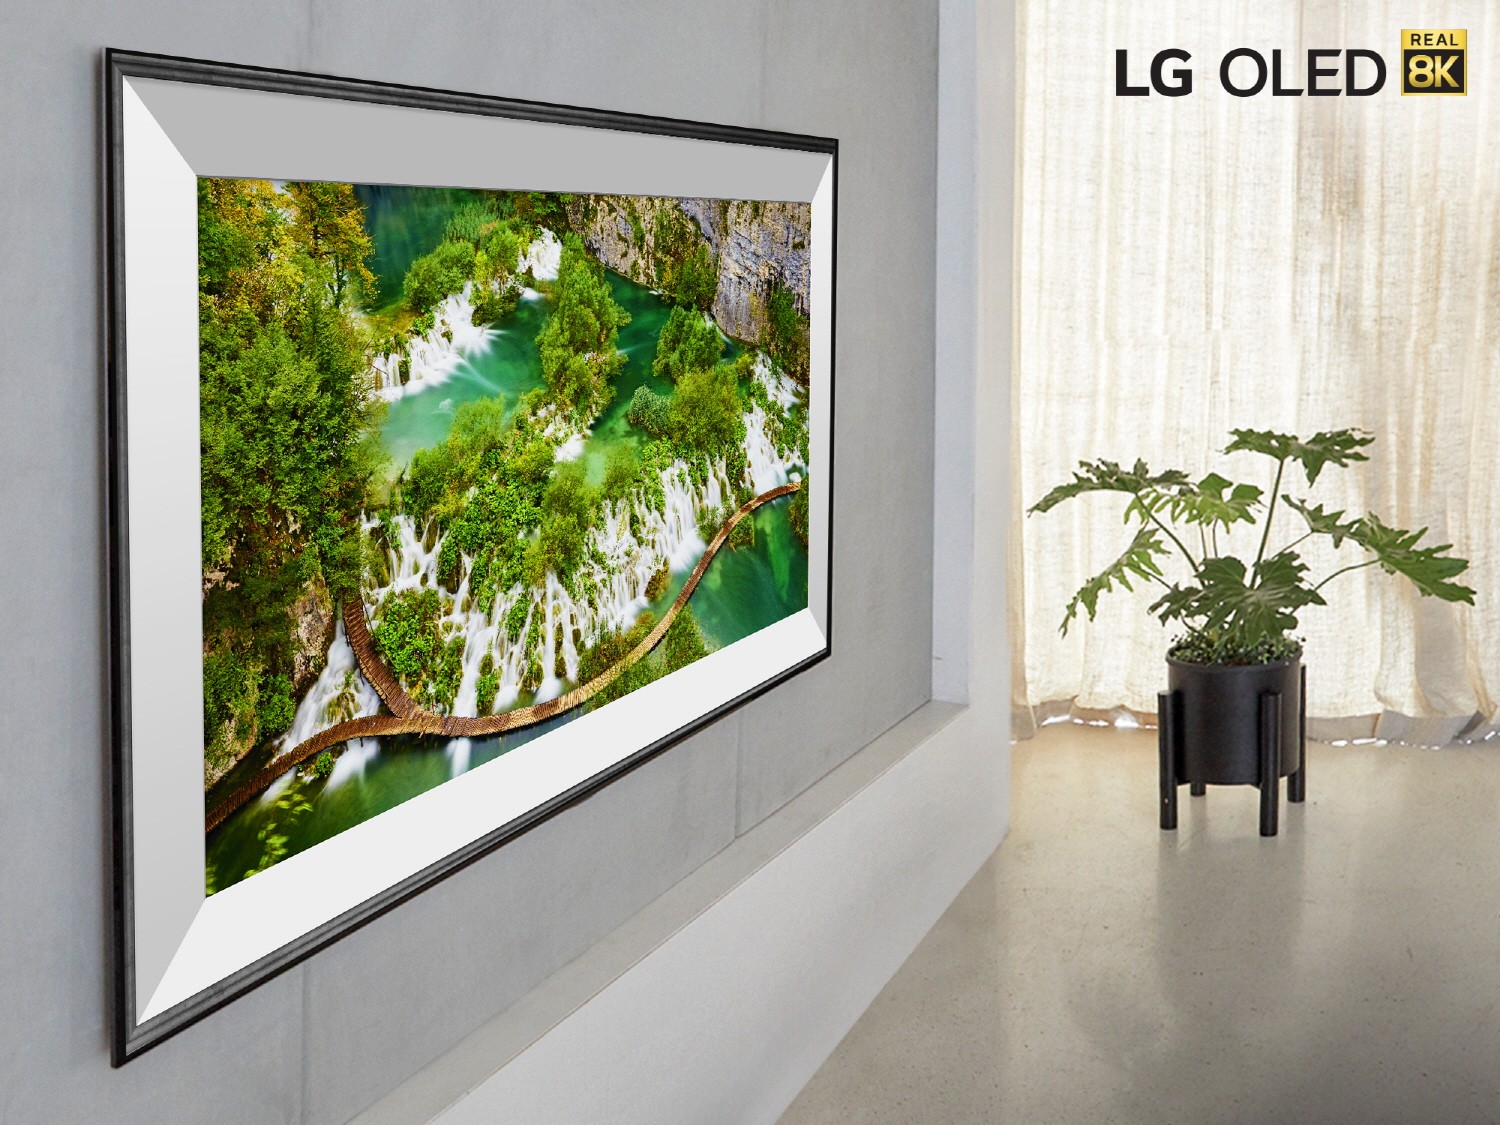 A closer look at LG’s 77-inch 8K OLED TV model ZX hanging flush on a living room wall, with the LG OLED Real 8K logo in the top-right corner.